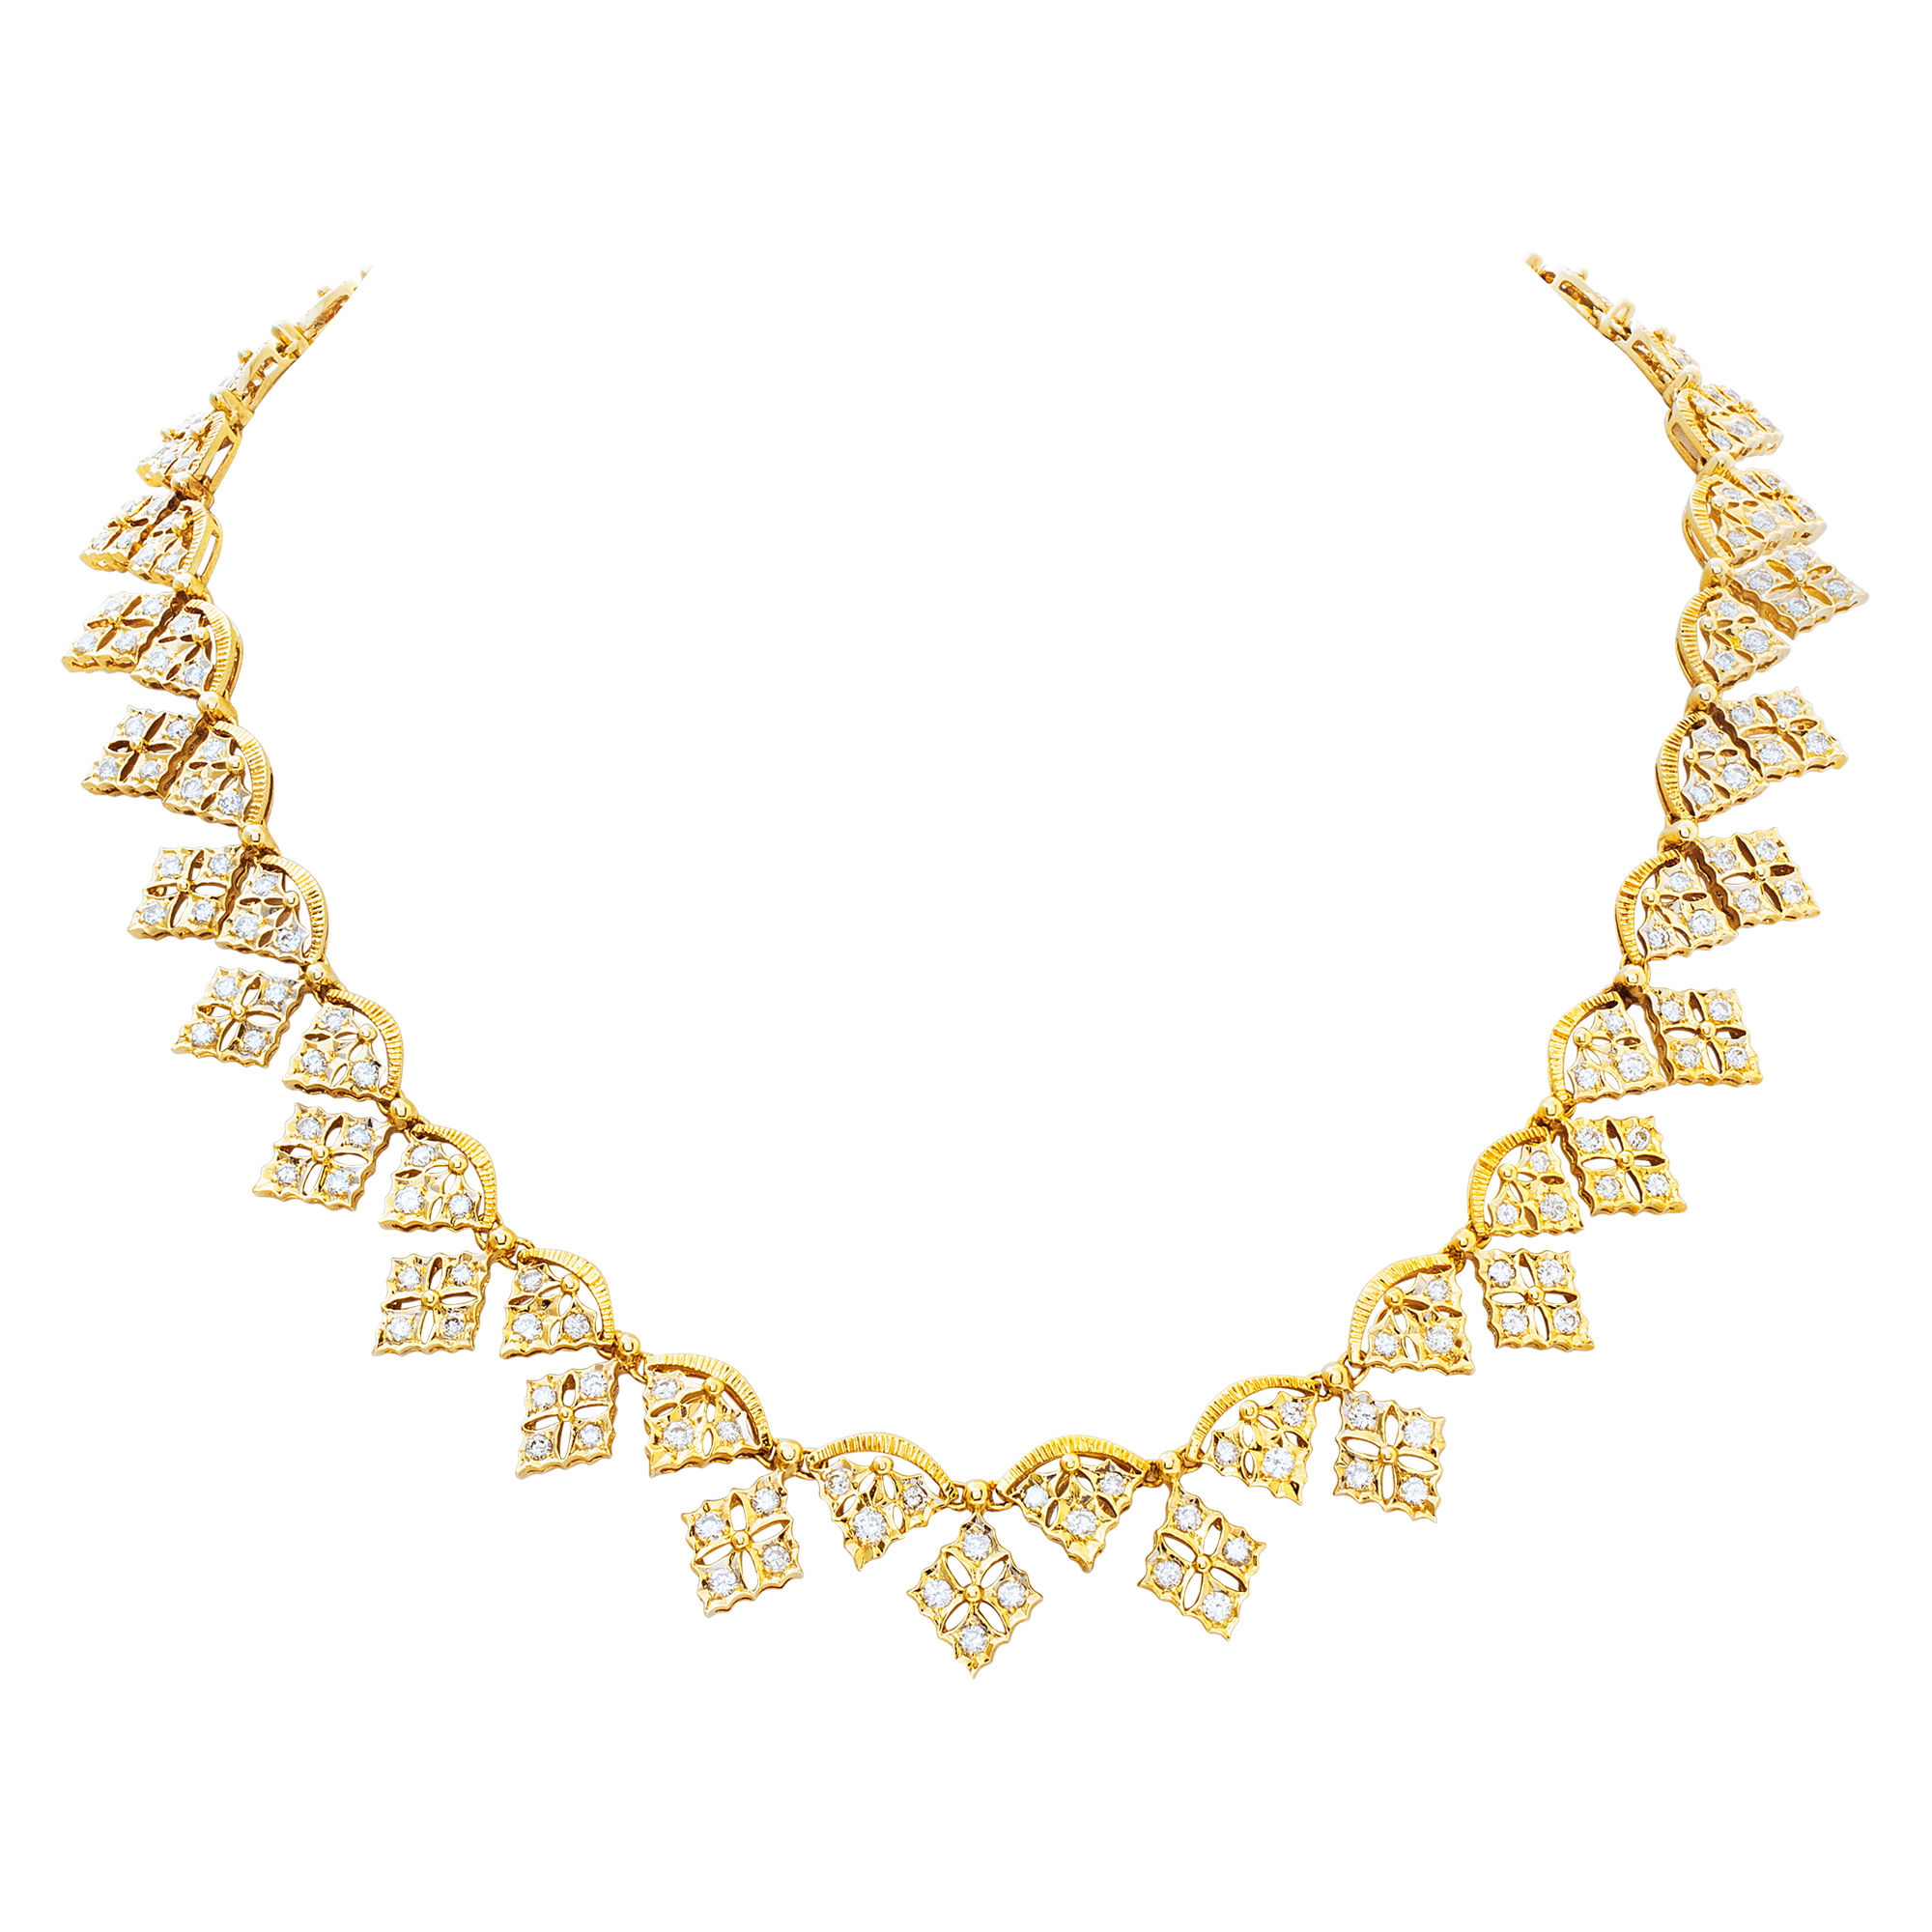 Diamond geometric style necklace in 18k yellow gold, with over 5.5 carats round brilliant cut diamonds image 1